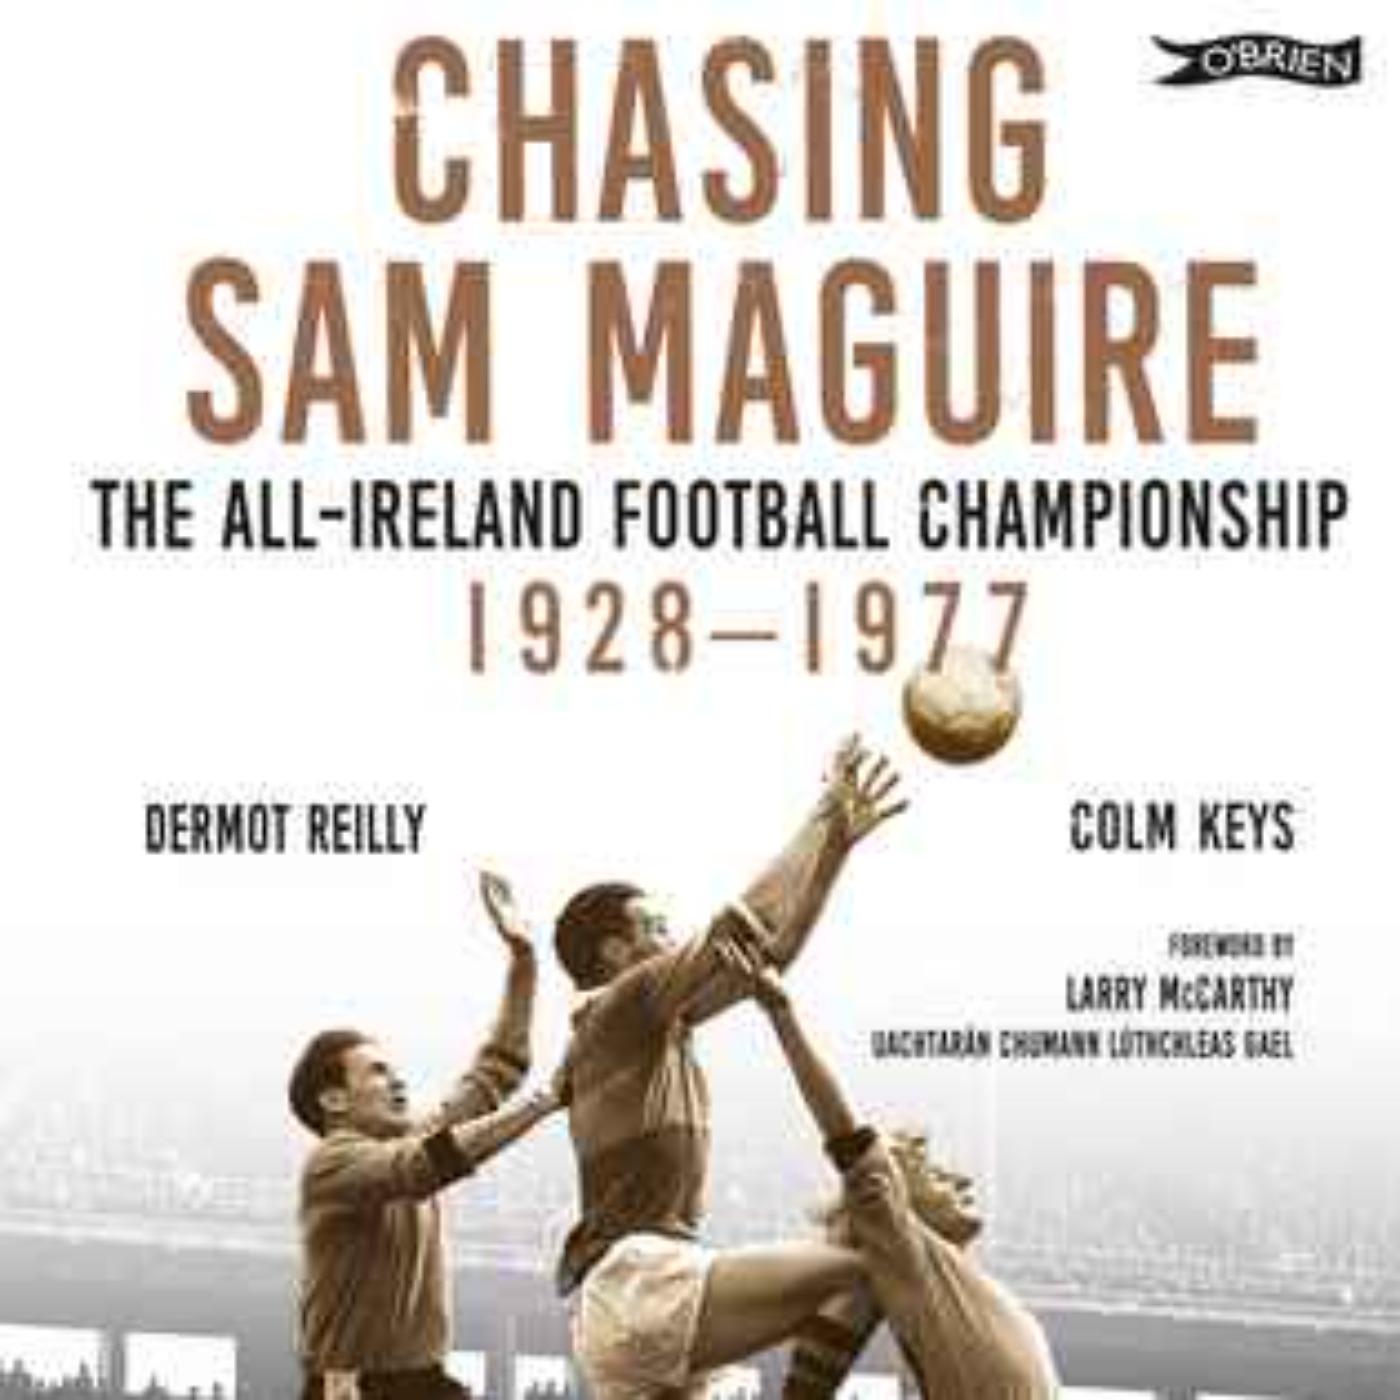 Sunday Sport | "Chasing Sam Maguire" A Magnificent Addition To GAA Library